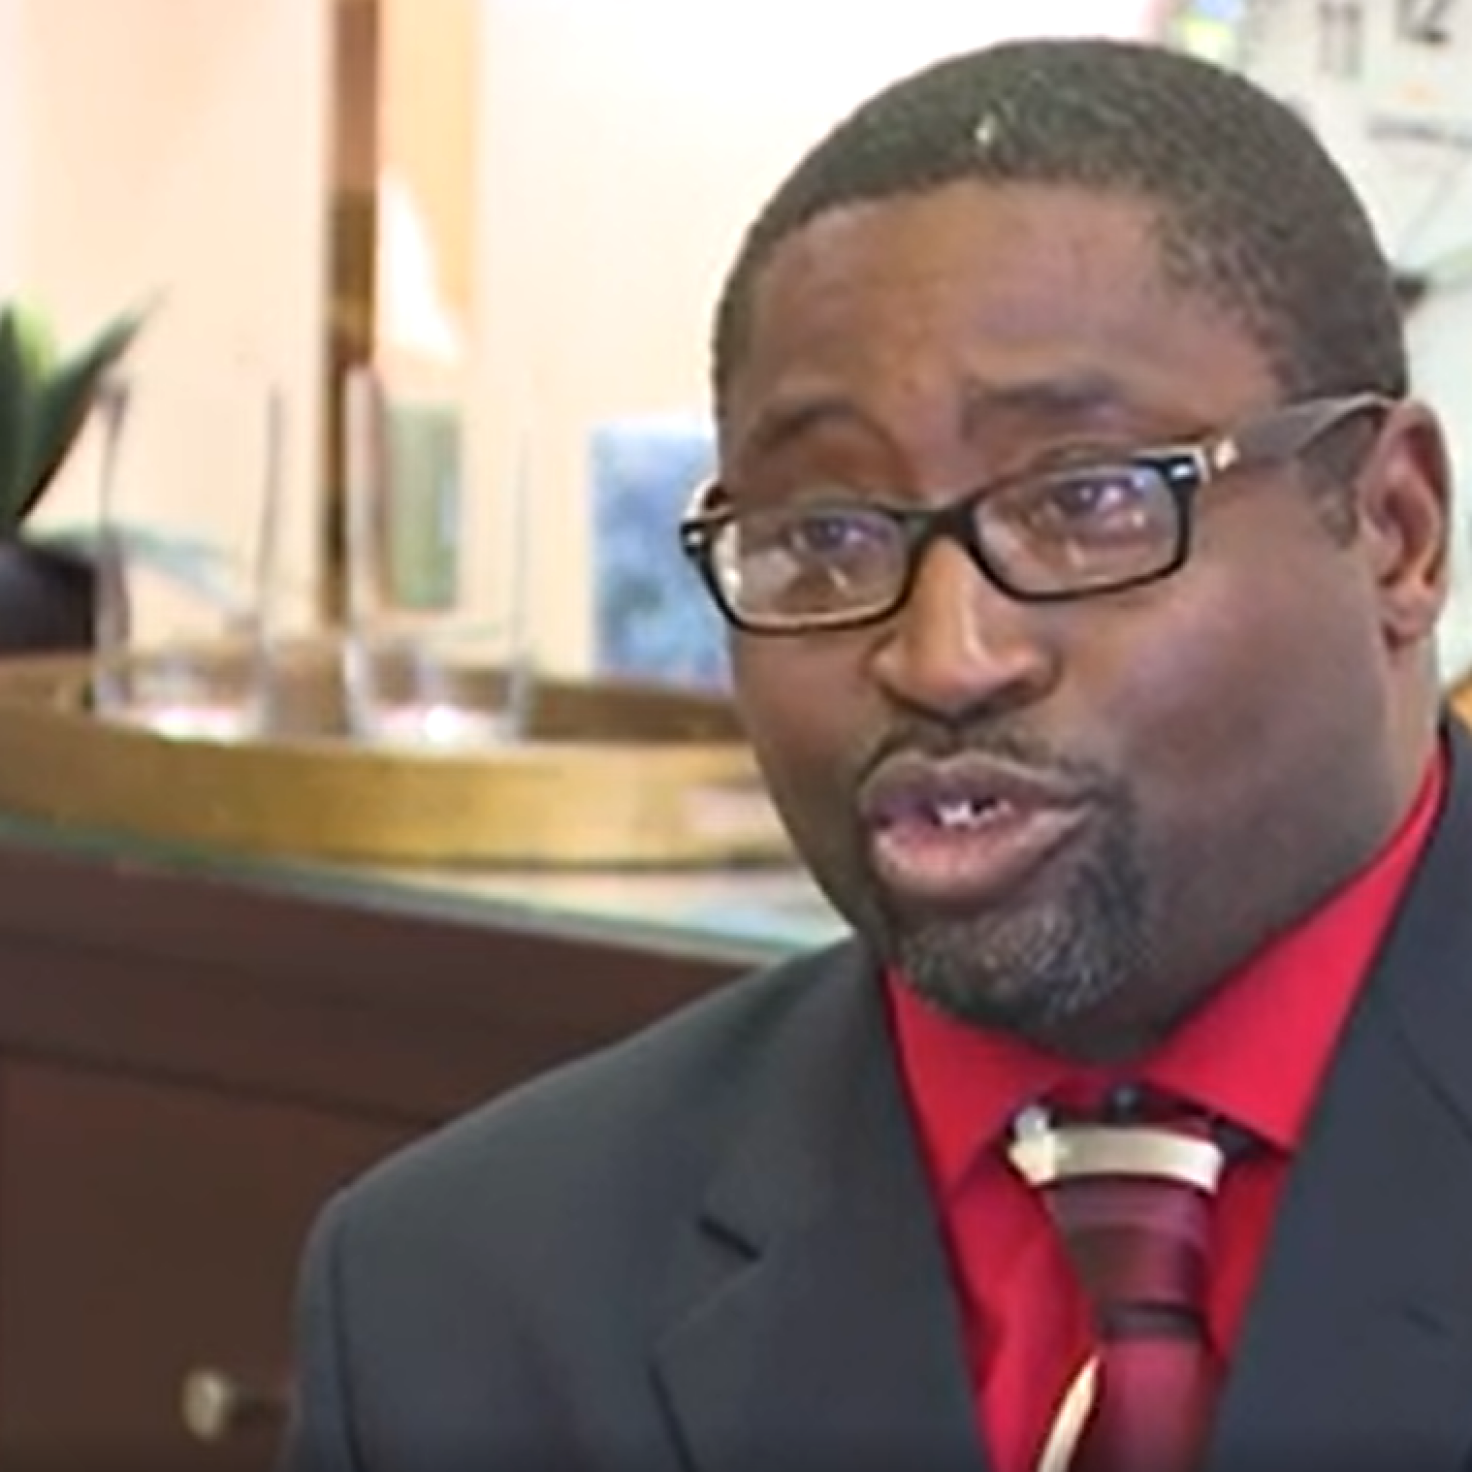 Detroit Man Says He Was Discriminated Against When Trying To Cash Racial Discrimination Lawsuit Checks